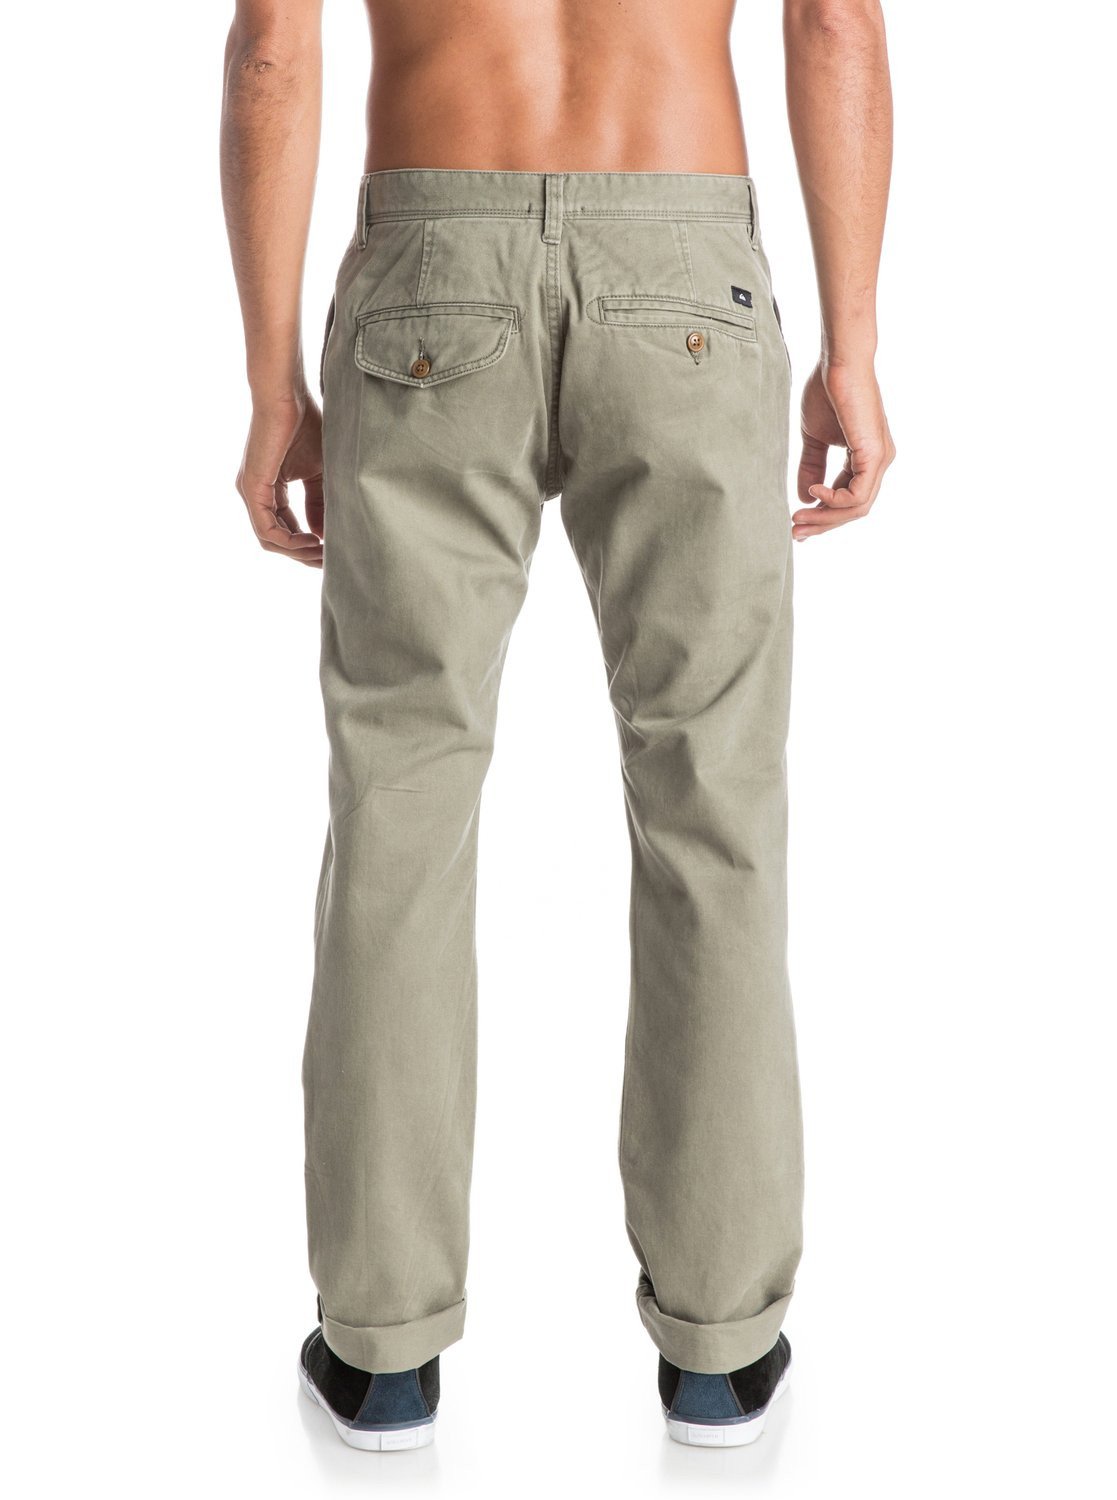 Quiksilver Dusty-Olive Everyday Chino Pant